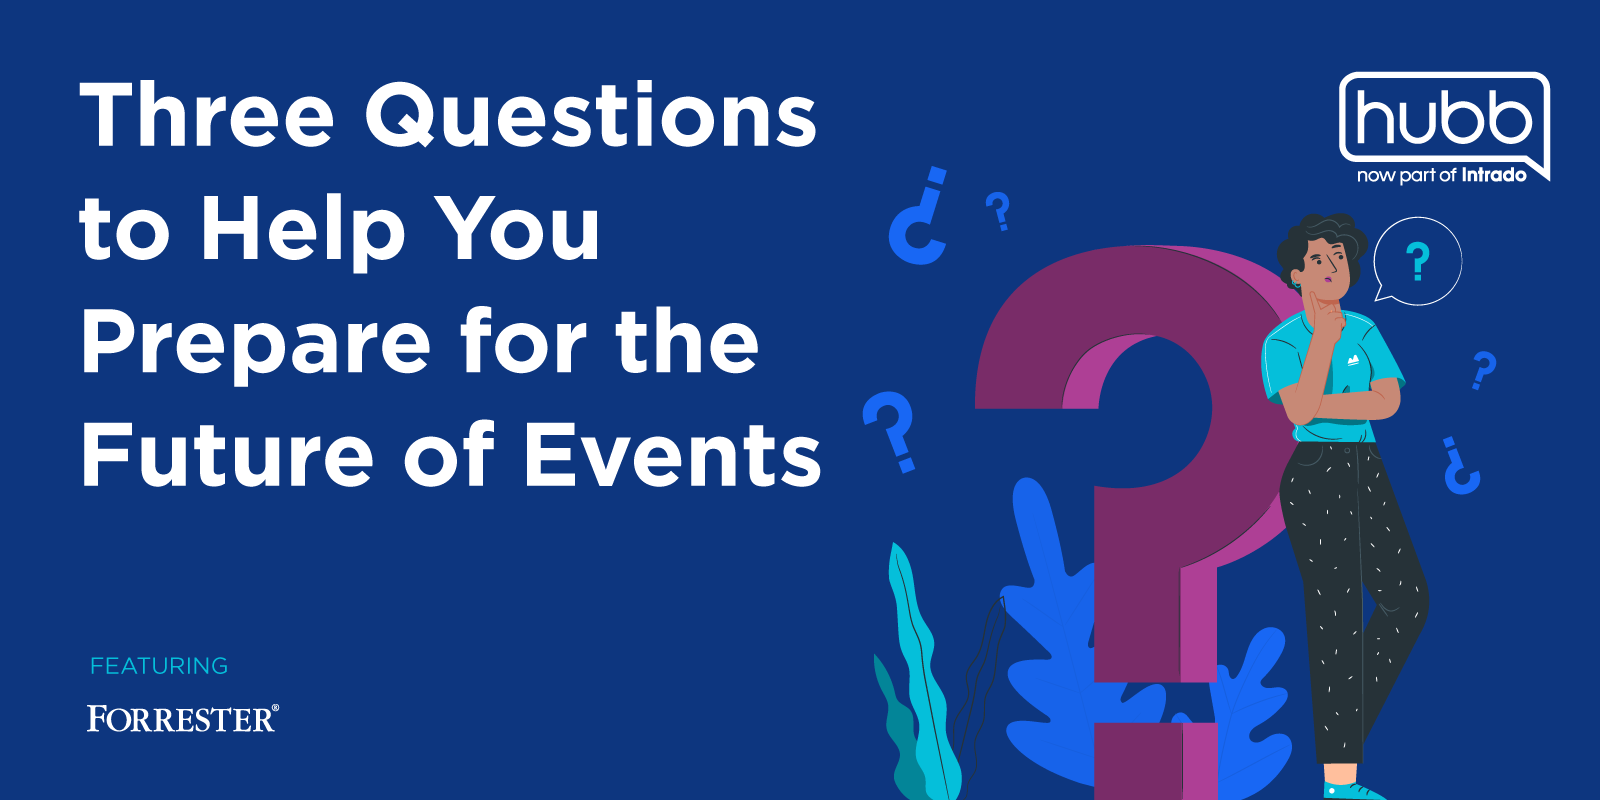 Three Questions to Help You Prepare for the Future of Events